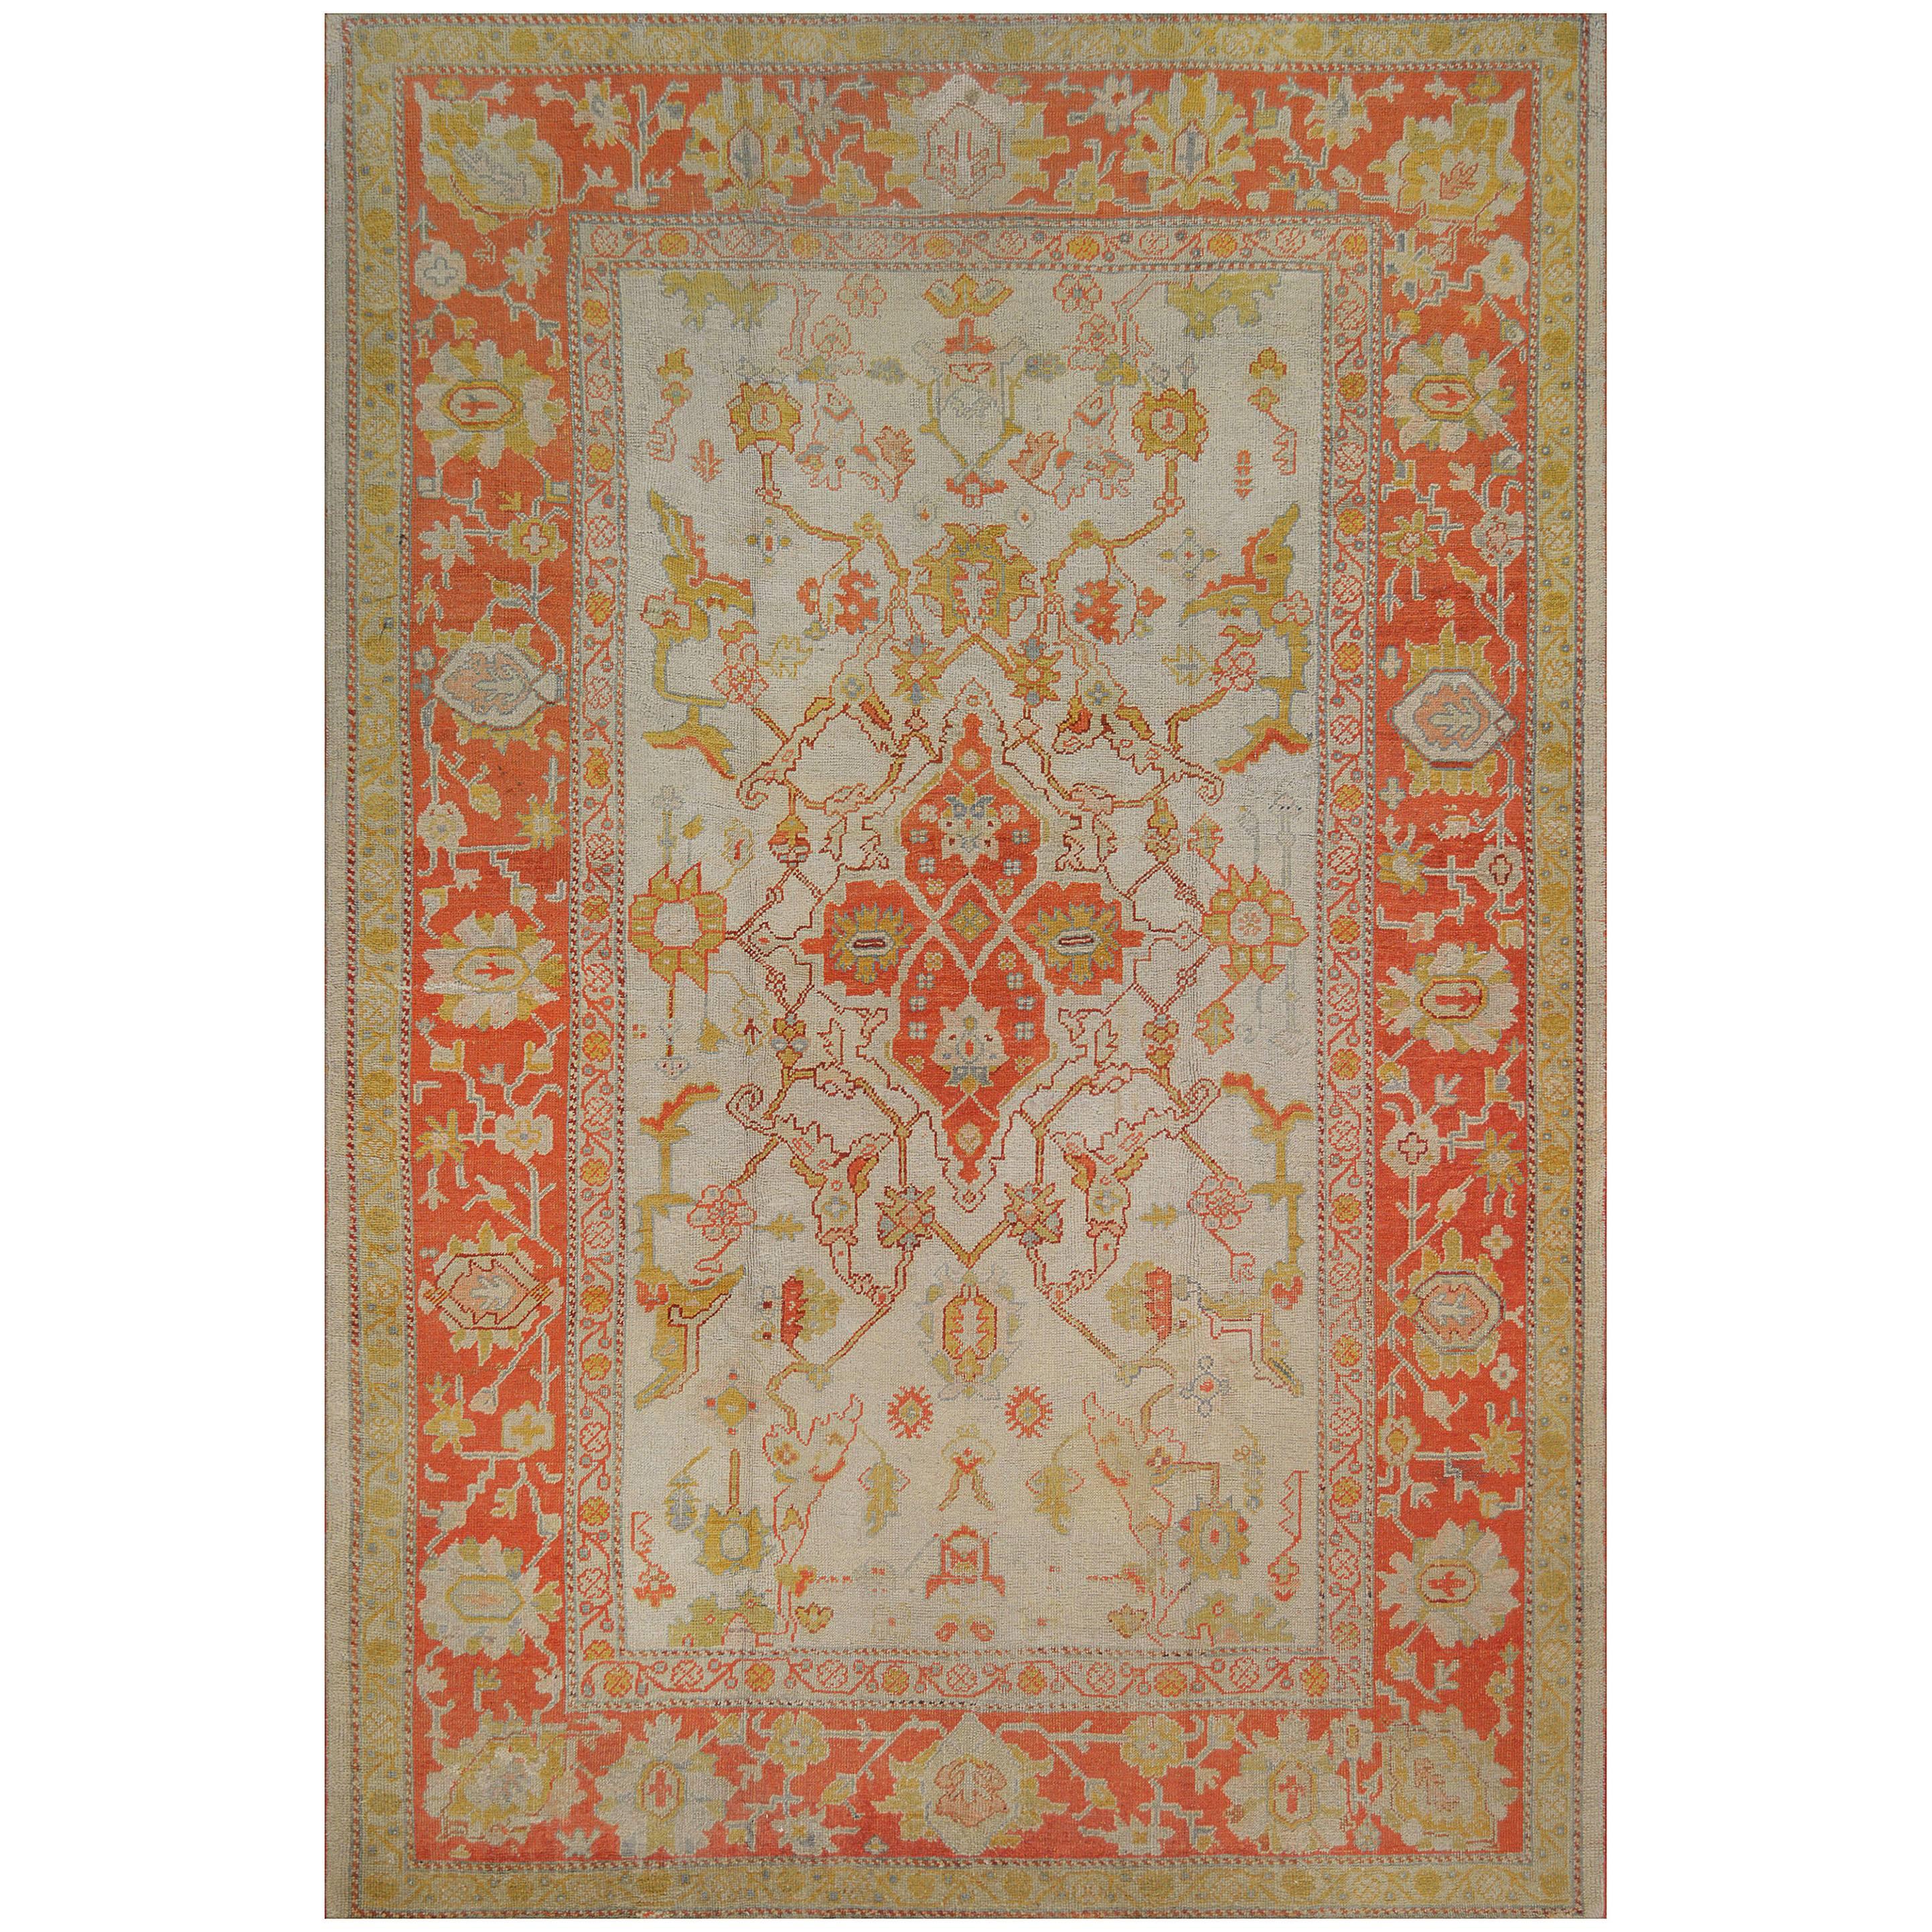 Hand-Woven Late 19th Century Wool Oushak Rug from Turkey